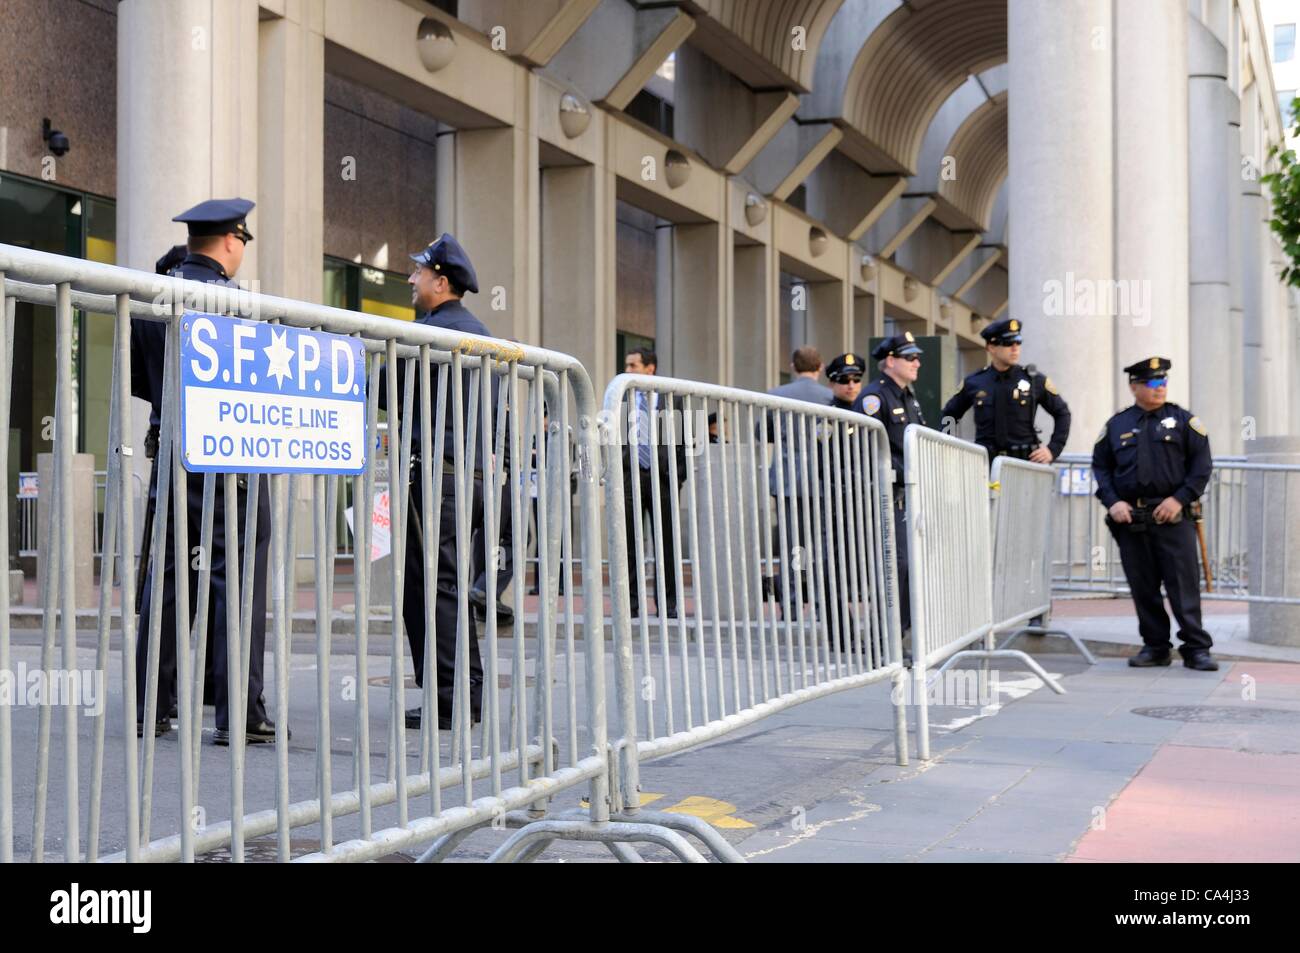 San Francisco, California, USA - June 06, 2012: San Francisco Police Officers, cordon off Spear Street ahead of President Obama arriving for a financial meeting he has planned toward funding for his election campaign. Stock Photo